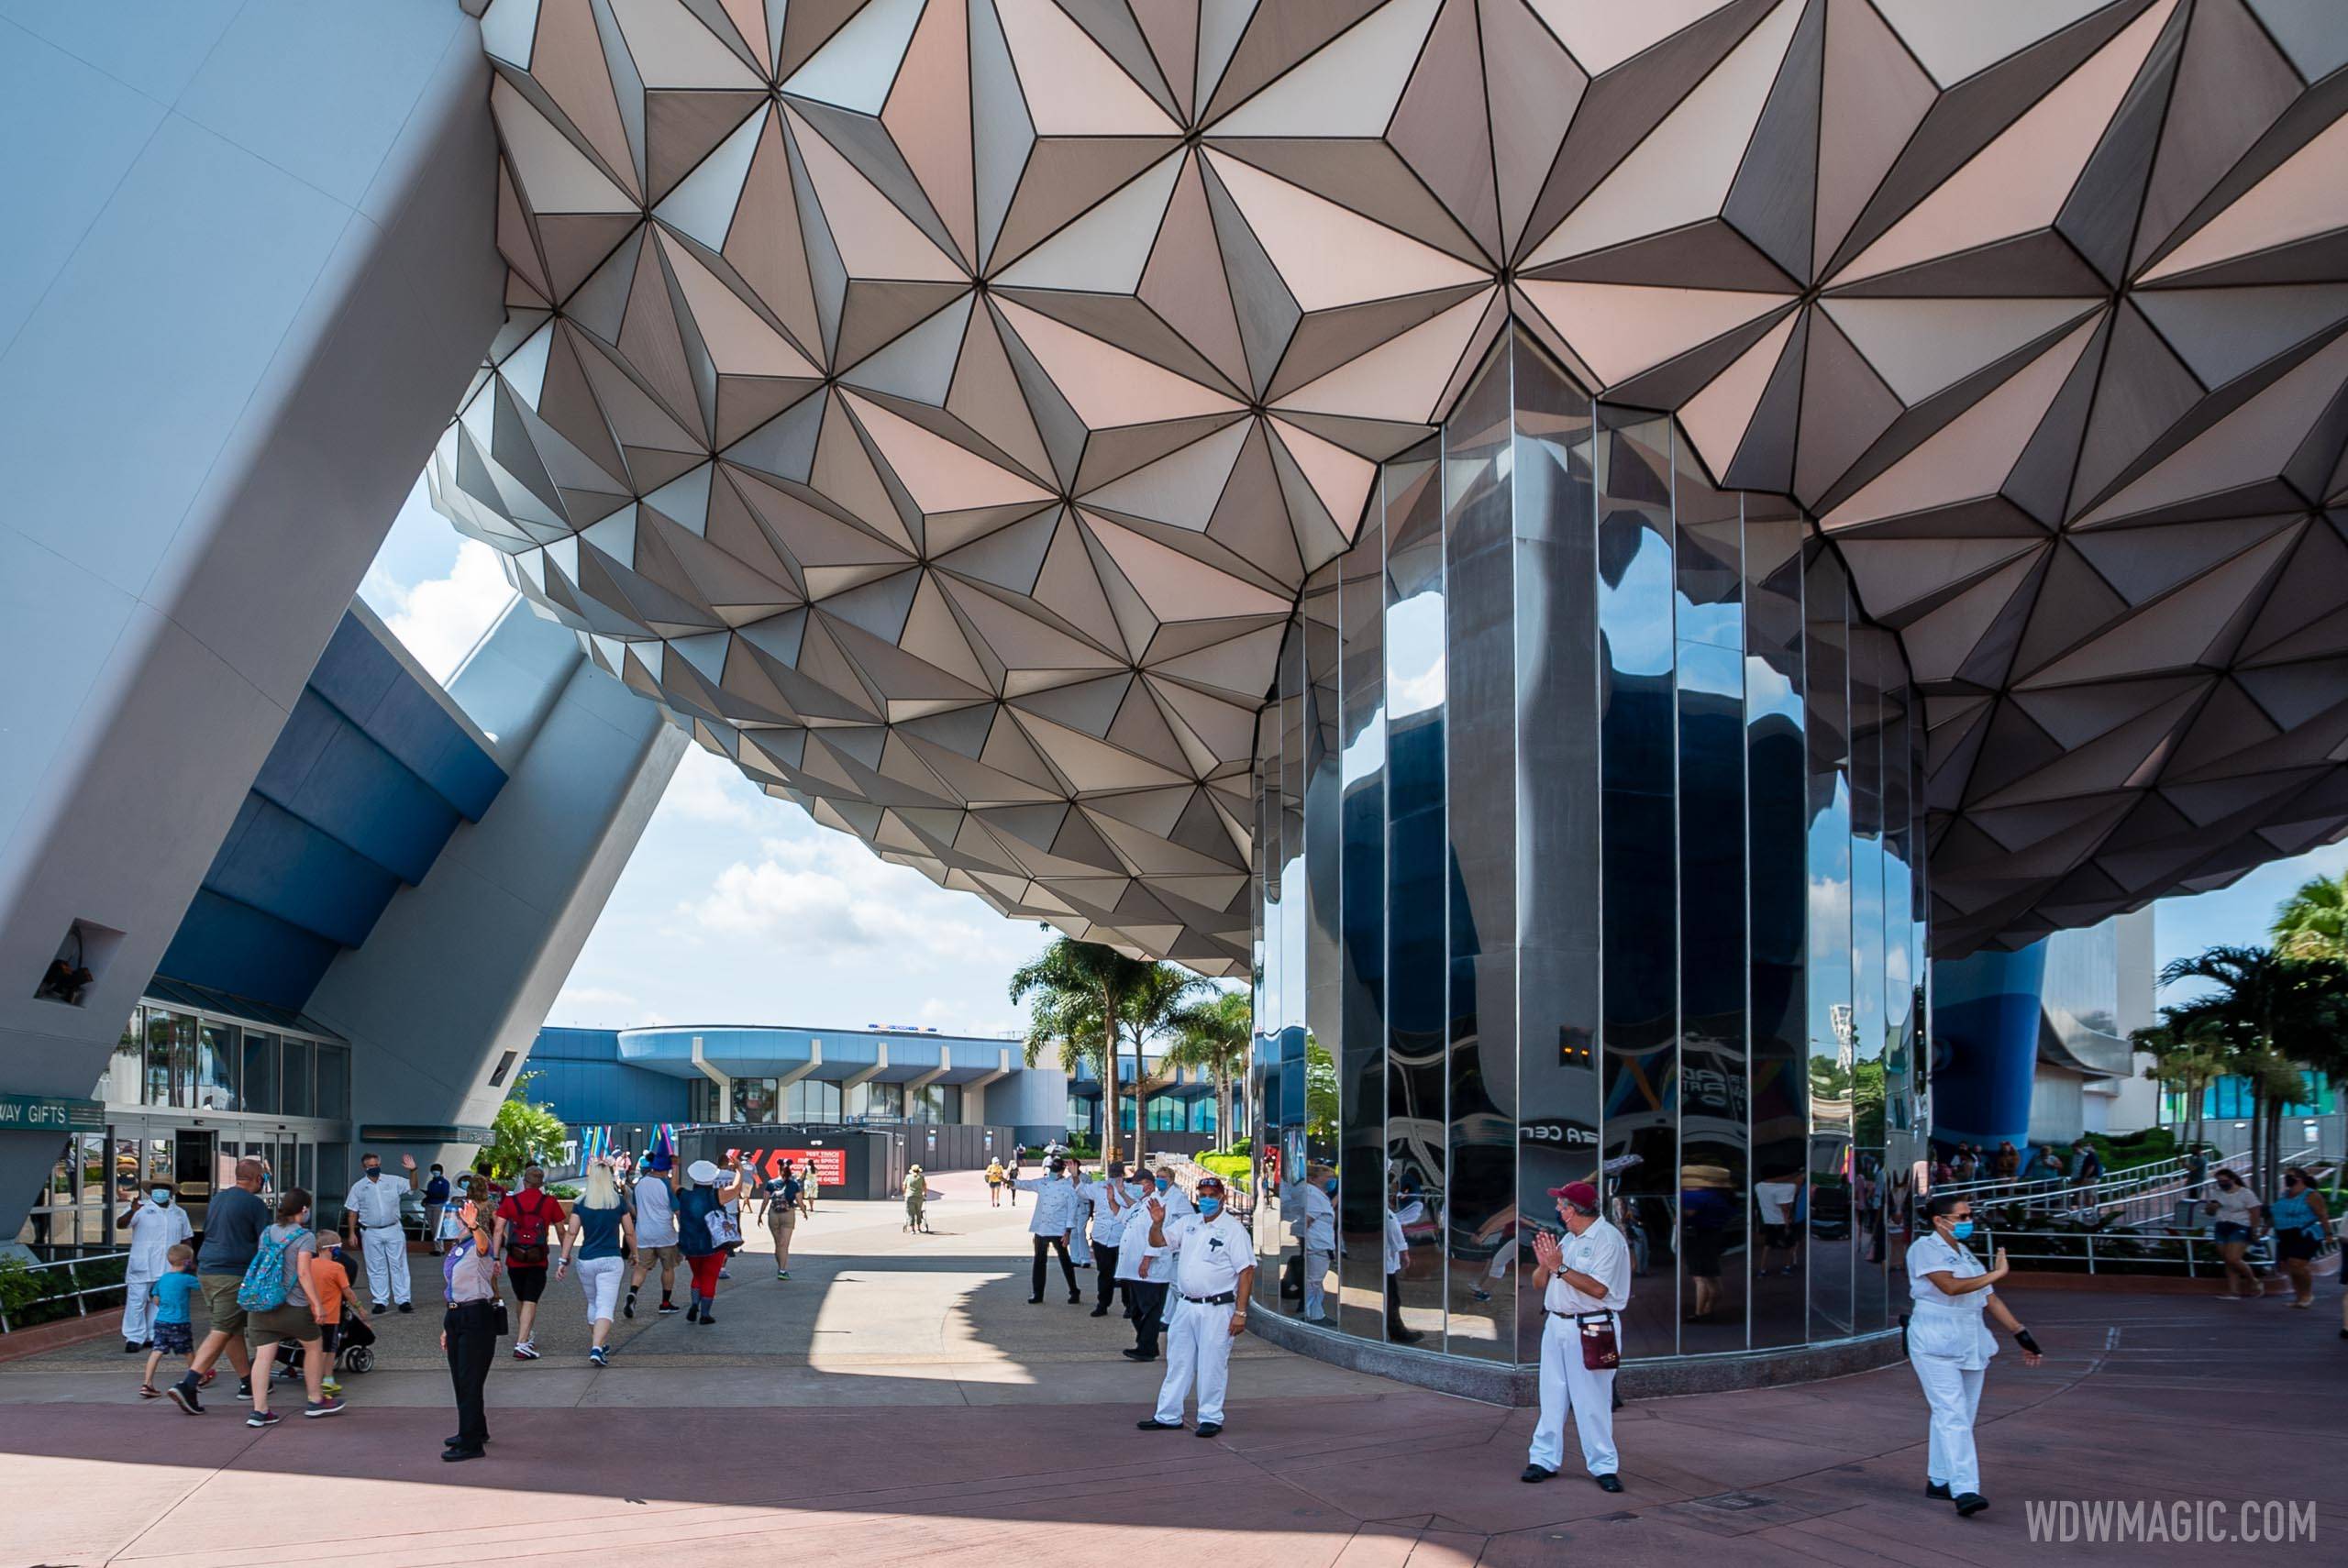 VIDEO - EPCOT's reopening from COVID-19 shutdown